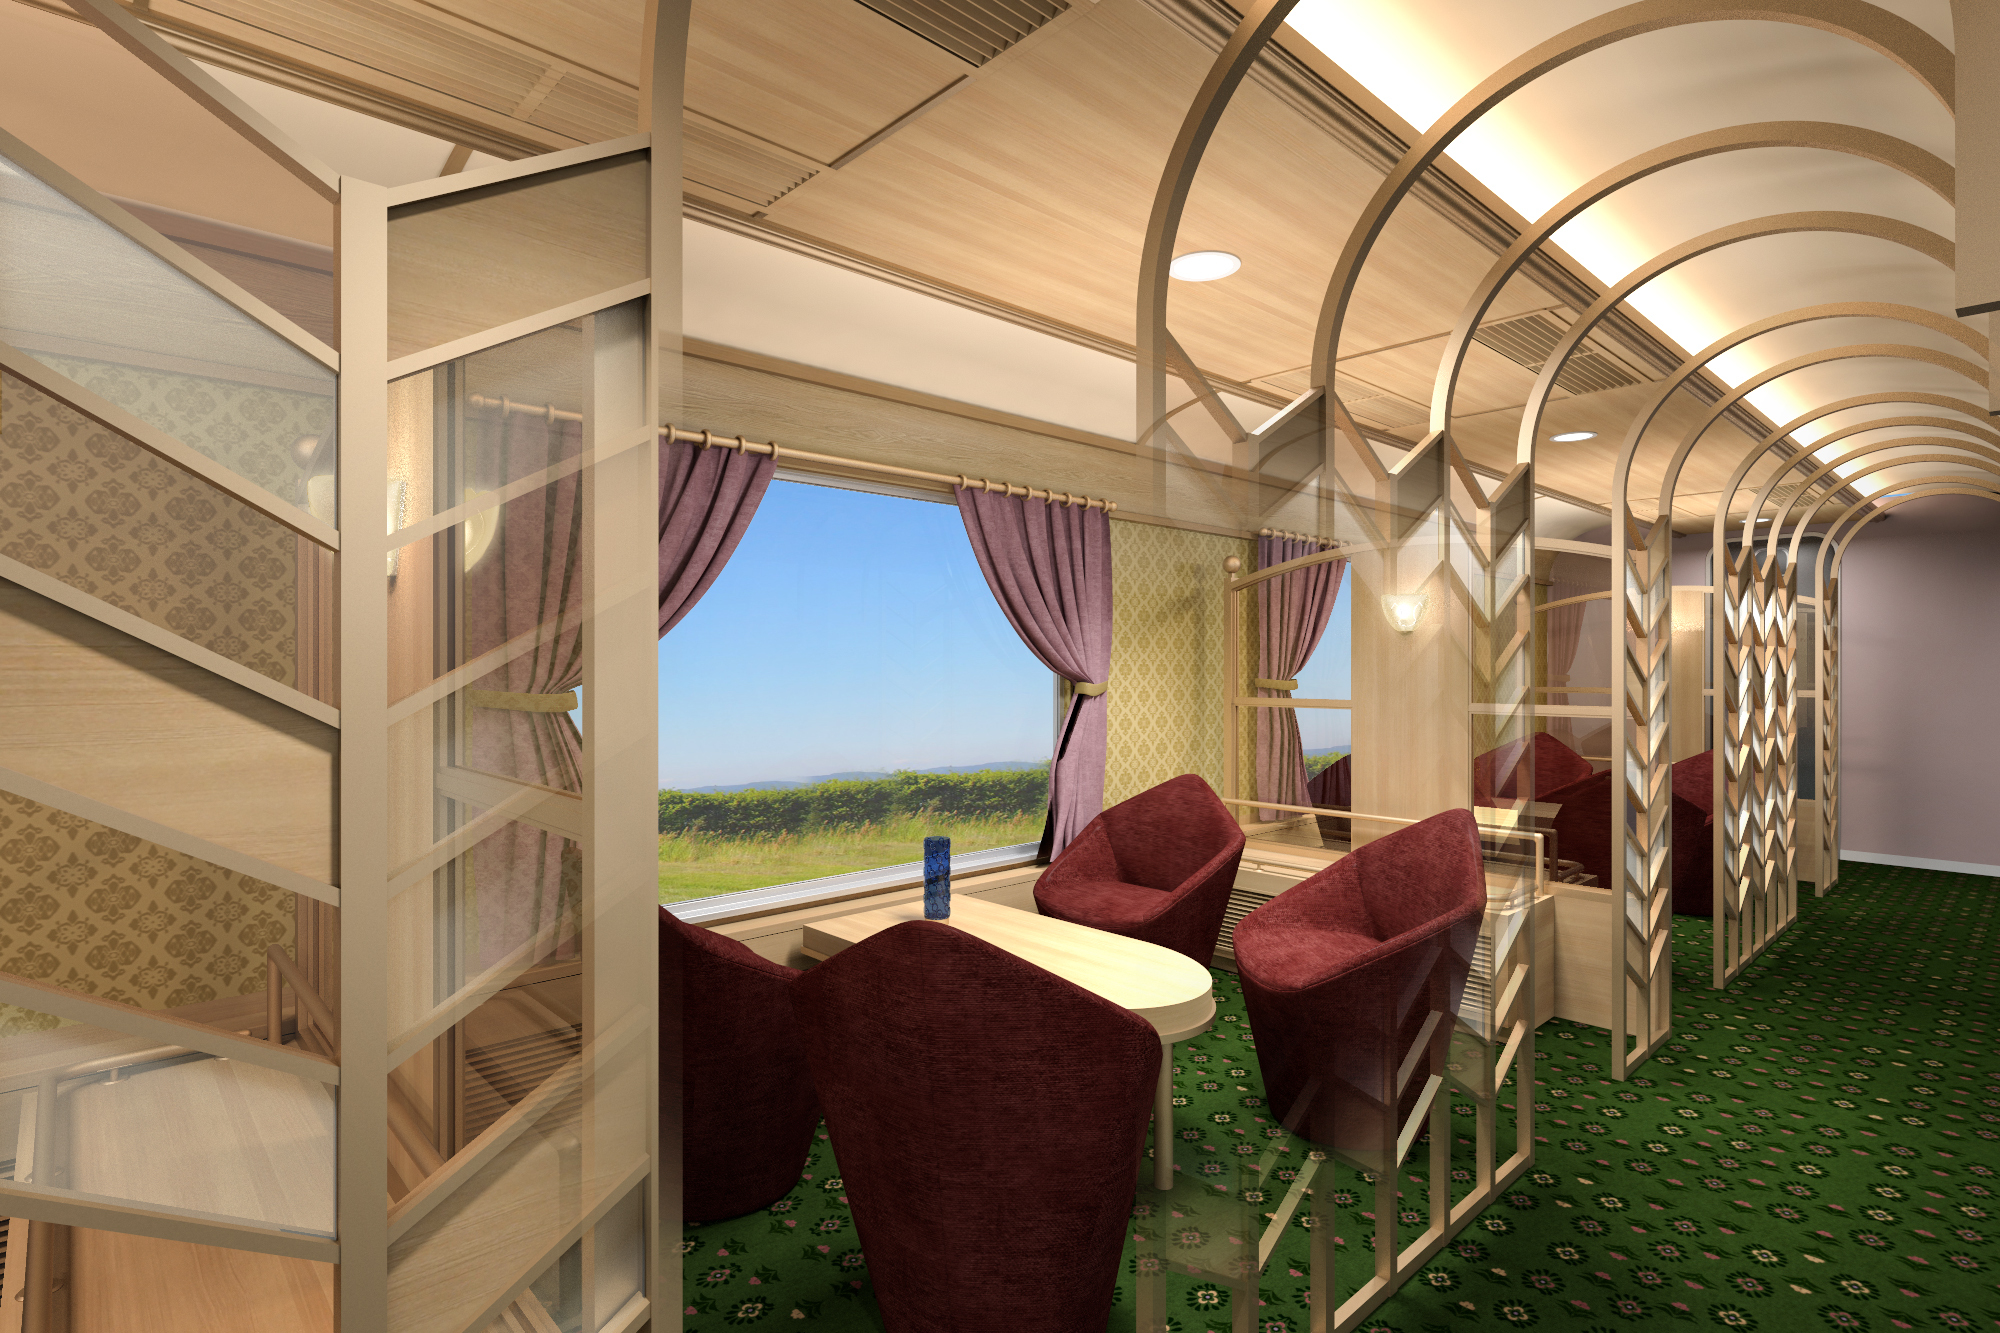 An artist's impression of a train restaurant's seating area, with plush red chairs, large windows and glass partitions between the tables